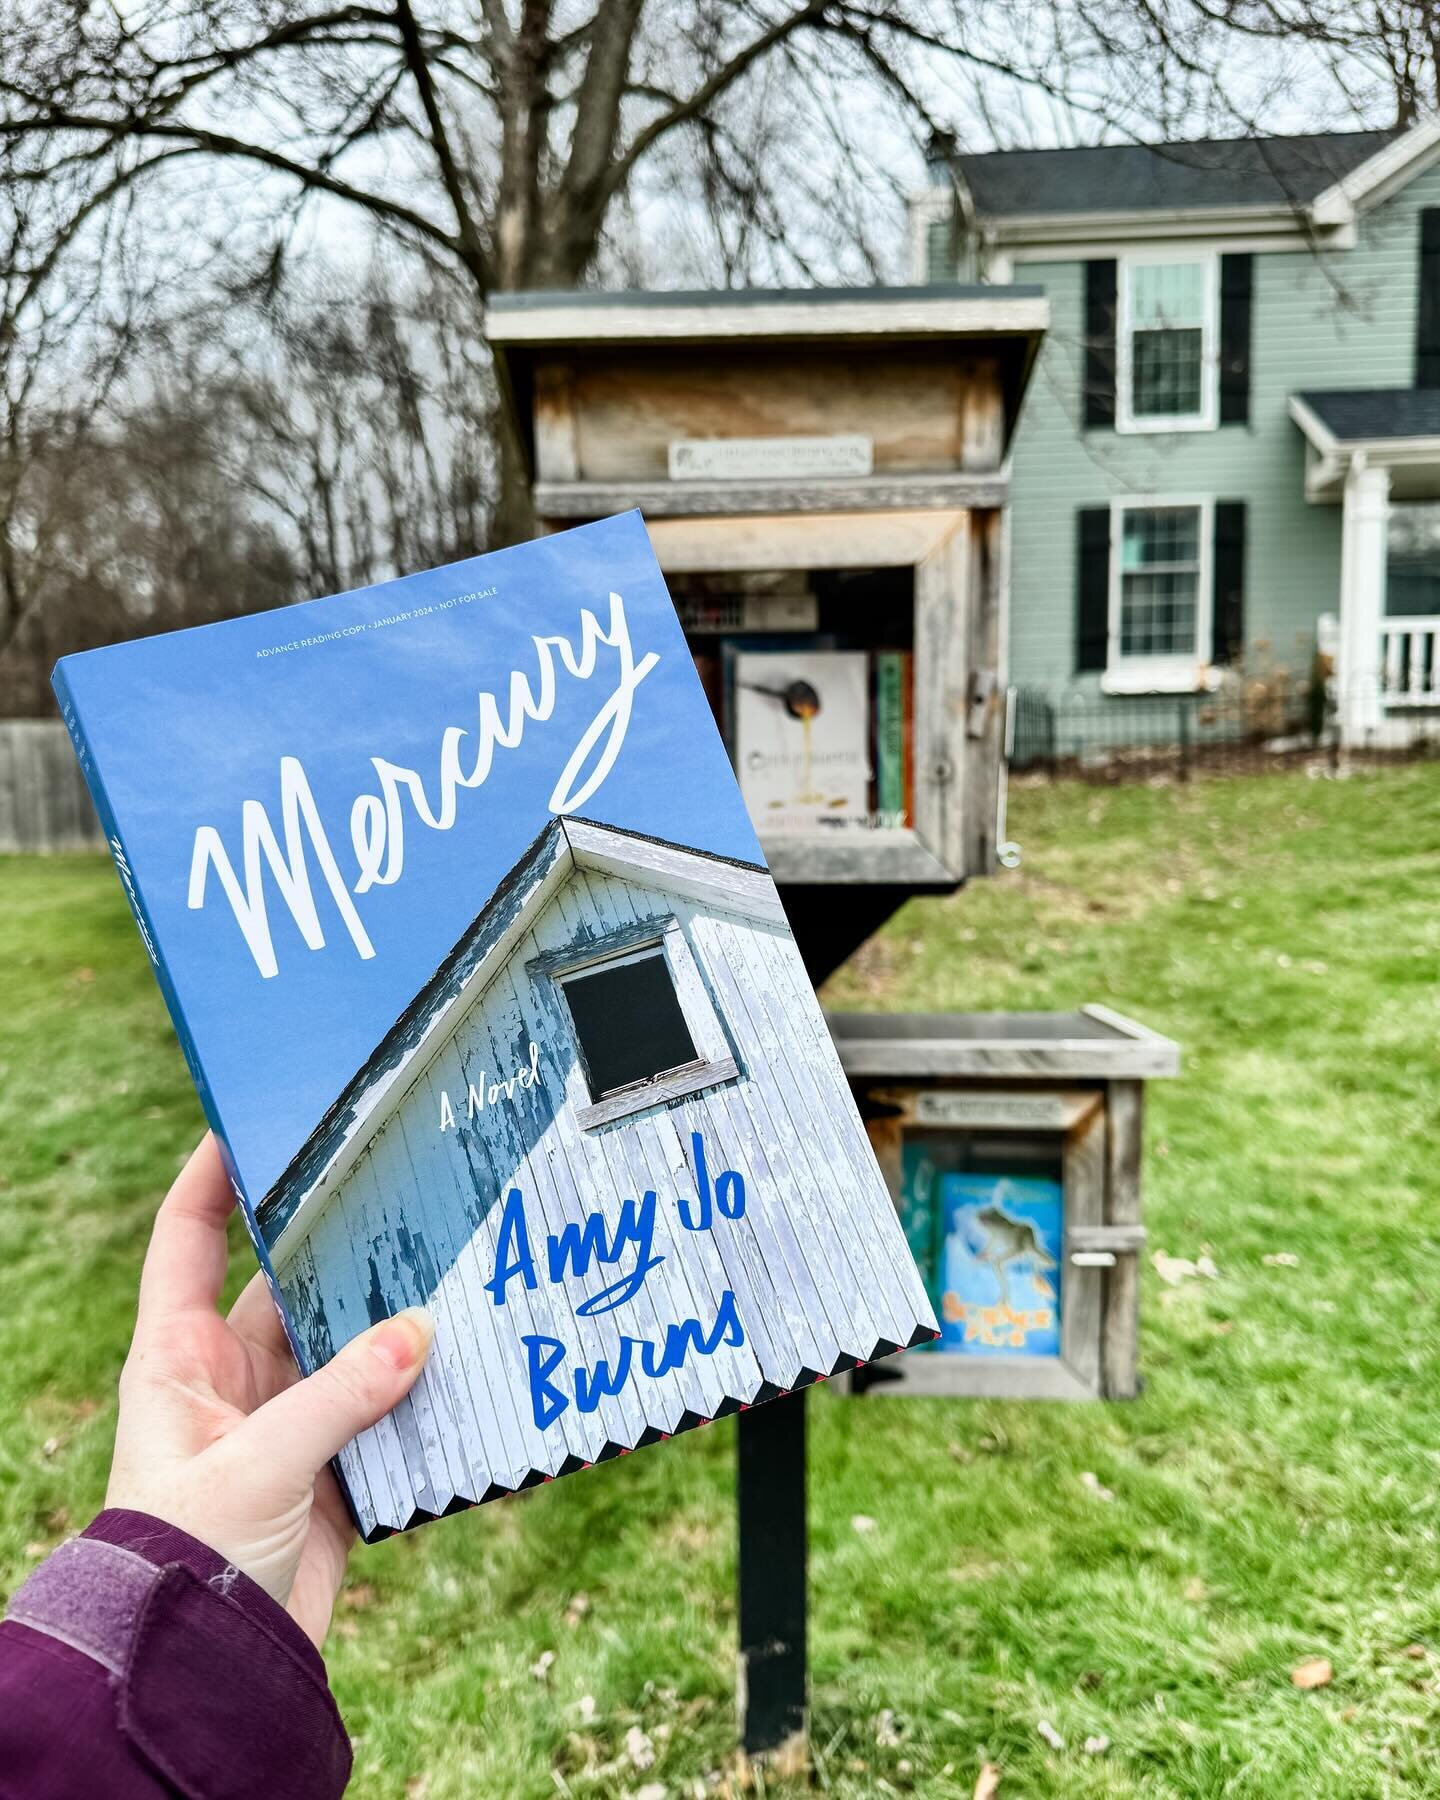 My first ever #littlefreelibrary drop day! Thanks @celadonbooks for sending me an extra copy of MERCURY to leave in my local LFL. I have heard nothing but good things about Amy Jo Burns&rsquo; work, so it was fun to leave this gem for someone lucky!